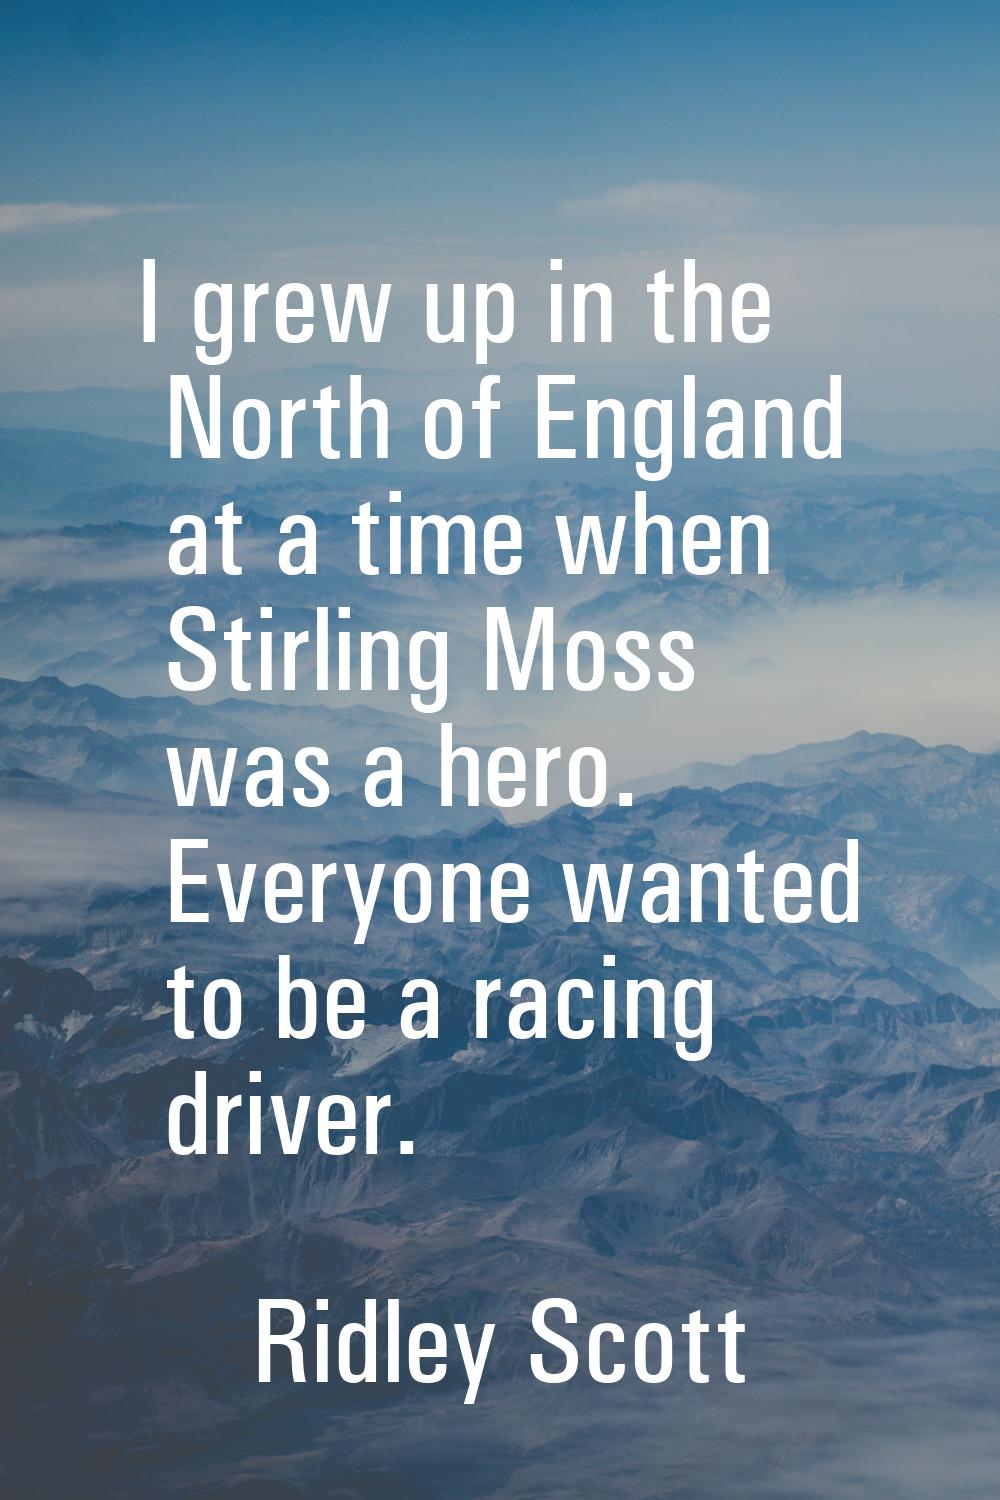 I grew up in the North of England at a time when Stirling Moss was a hero. Everyone wanted to be a 